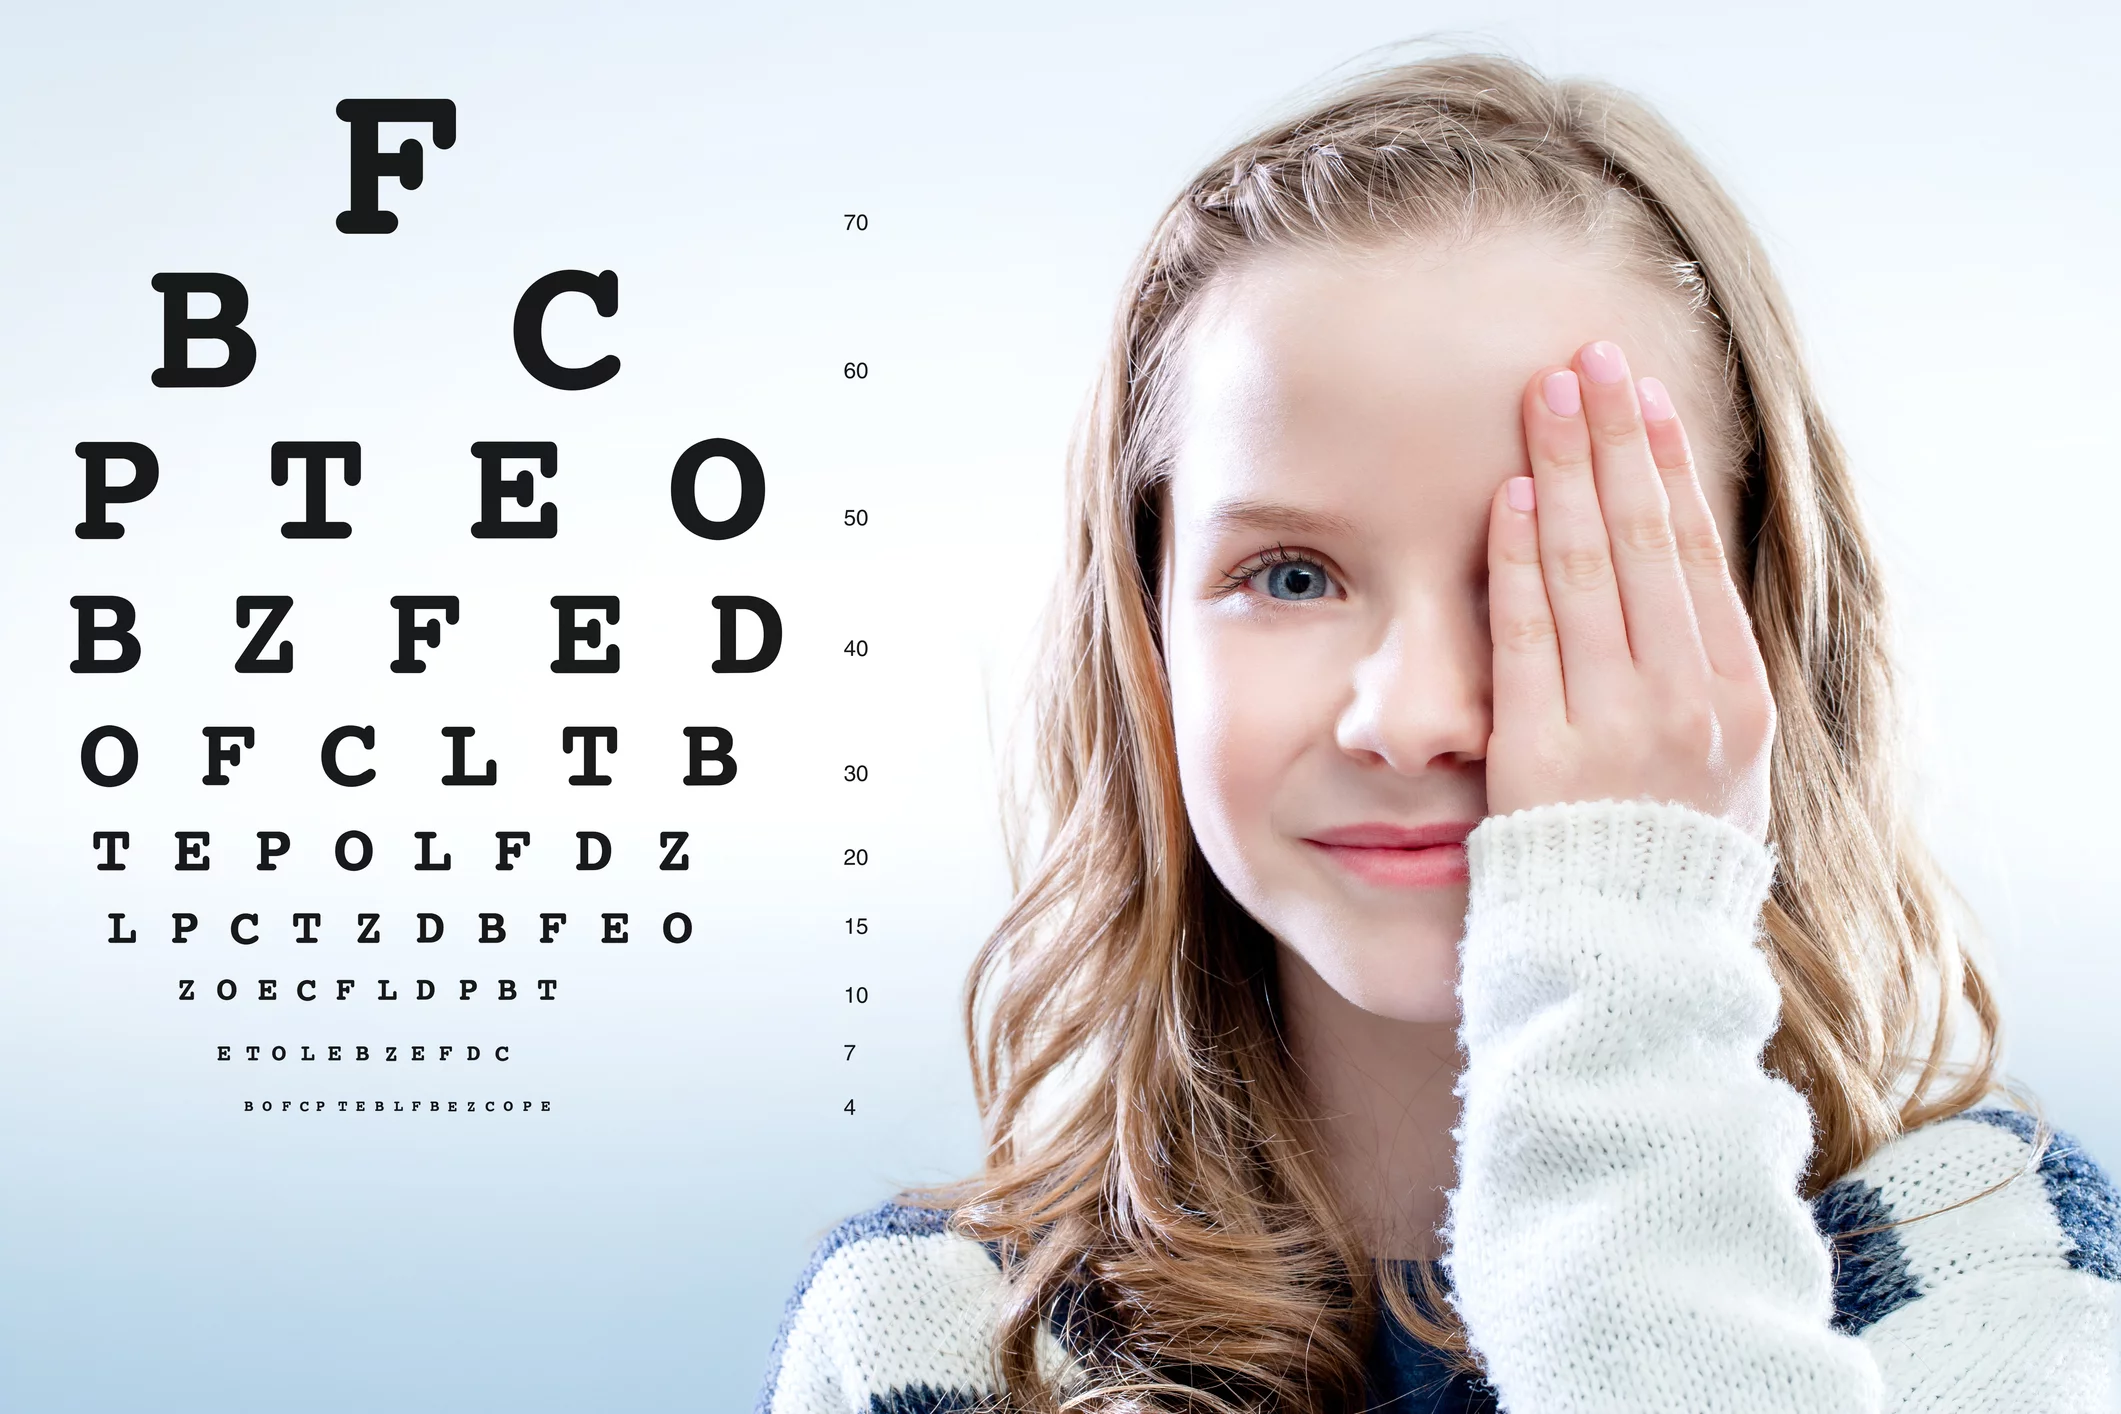 Signs Your Child May Need Glasses